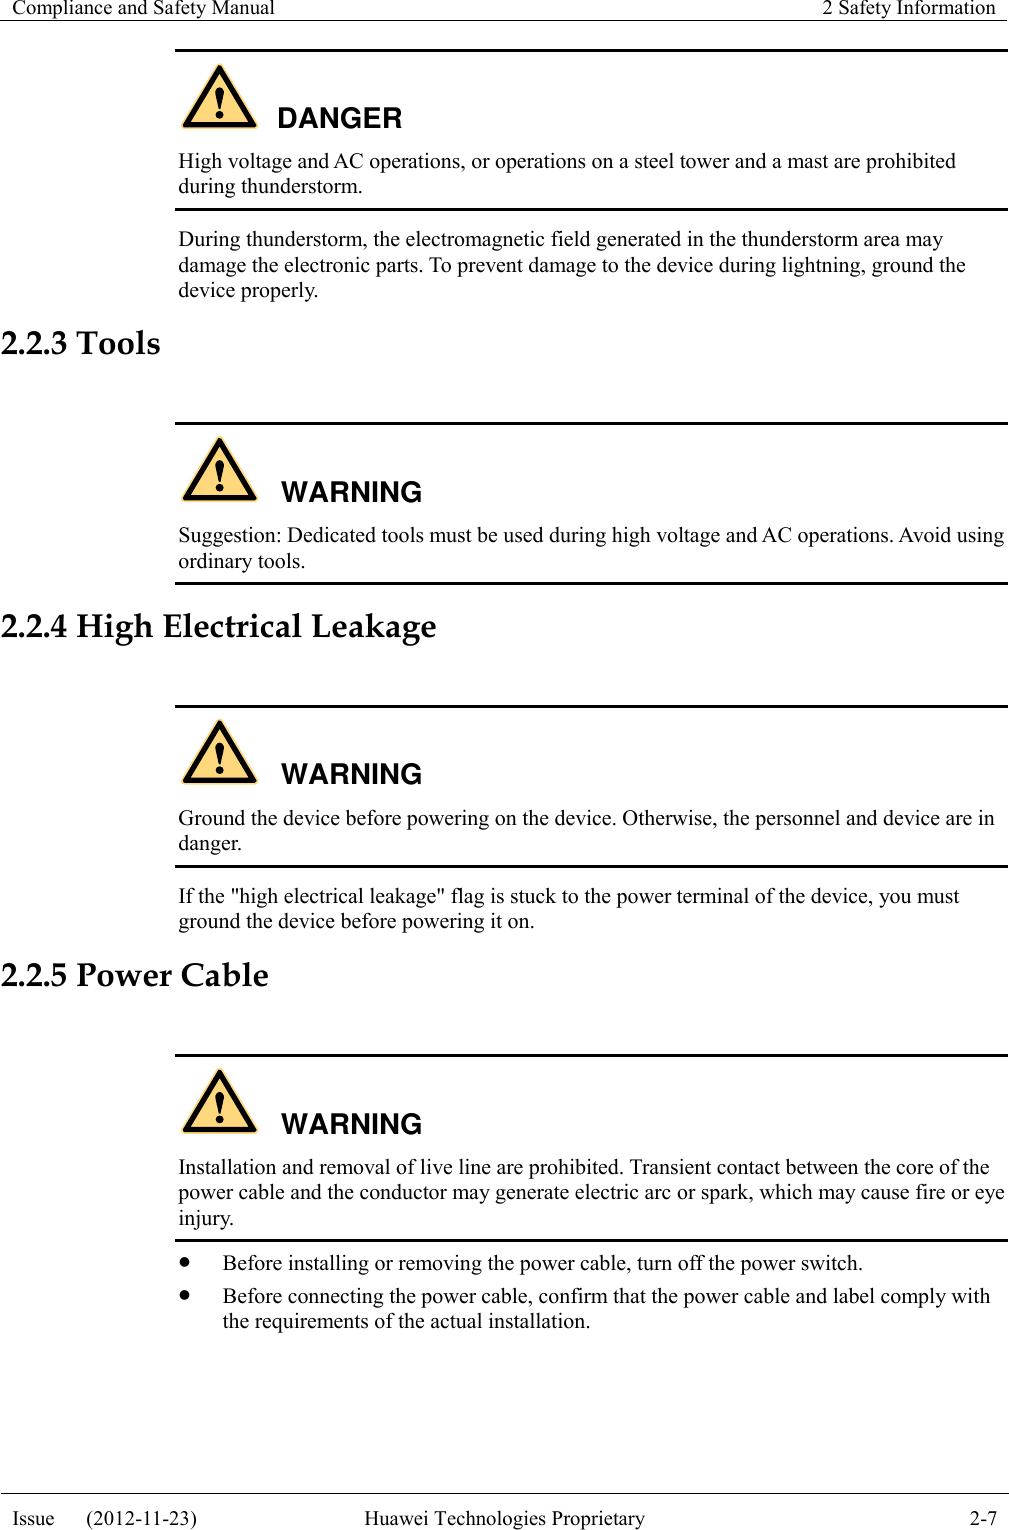 Compliance and Safety Manual 2 Safety Information  Issue      (2012-11-23) Huawei Technologies Proprietary 2-7  DANGER High voltage and AC operations, or operations on a steel tower and a mast are prohibited during thunderstorm. During thunderstorm, the electromagnetic field generated in the thunderstorm area may damage the electronic parts. To prevent damage to the device during lightning, ground the device properly. 2.2.3 Tools  WARNING Suggestion: Dedicated tools must be used during high voltage and AC operations. Avoid using ordinary tools. 2.2.4 High Electrical Leakage  WARNING Ground the device before powering on the device. Otherwise, the personnel and device are in danger. If the &quot;high electrical leakage&quot; flag is stuck to the power terminal of the device, you must ground the device before powering it on. 2.2.5 Power Cable  WARNING Installation and removal of live line are prohibited. Transient contact between the core of the power cable and the conductor may generate electric arc or spark, which may cause fire or eye injury.  Before installing or removing the power cable, turn off the power switch.  Before connecting the power cable, confirm that the power cable and label comply with the requirements of the actual installation.  